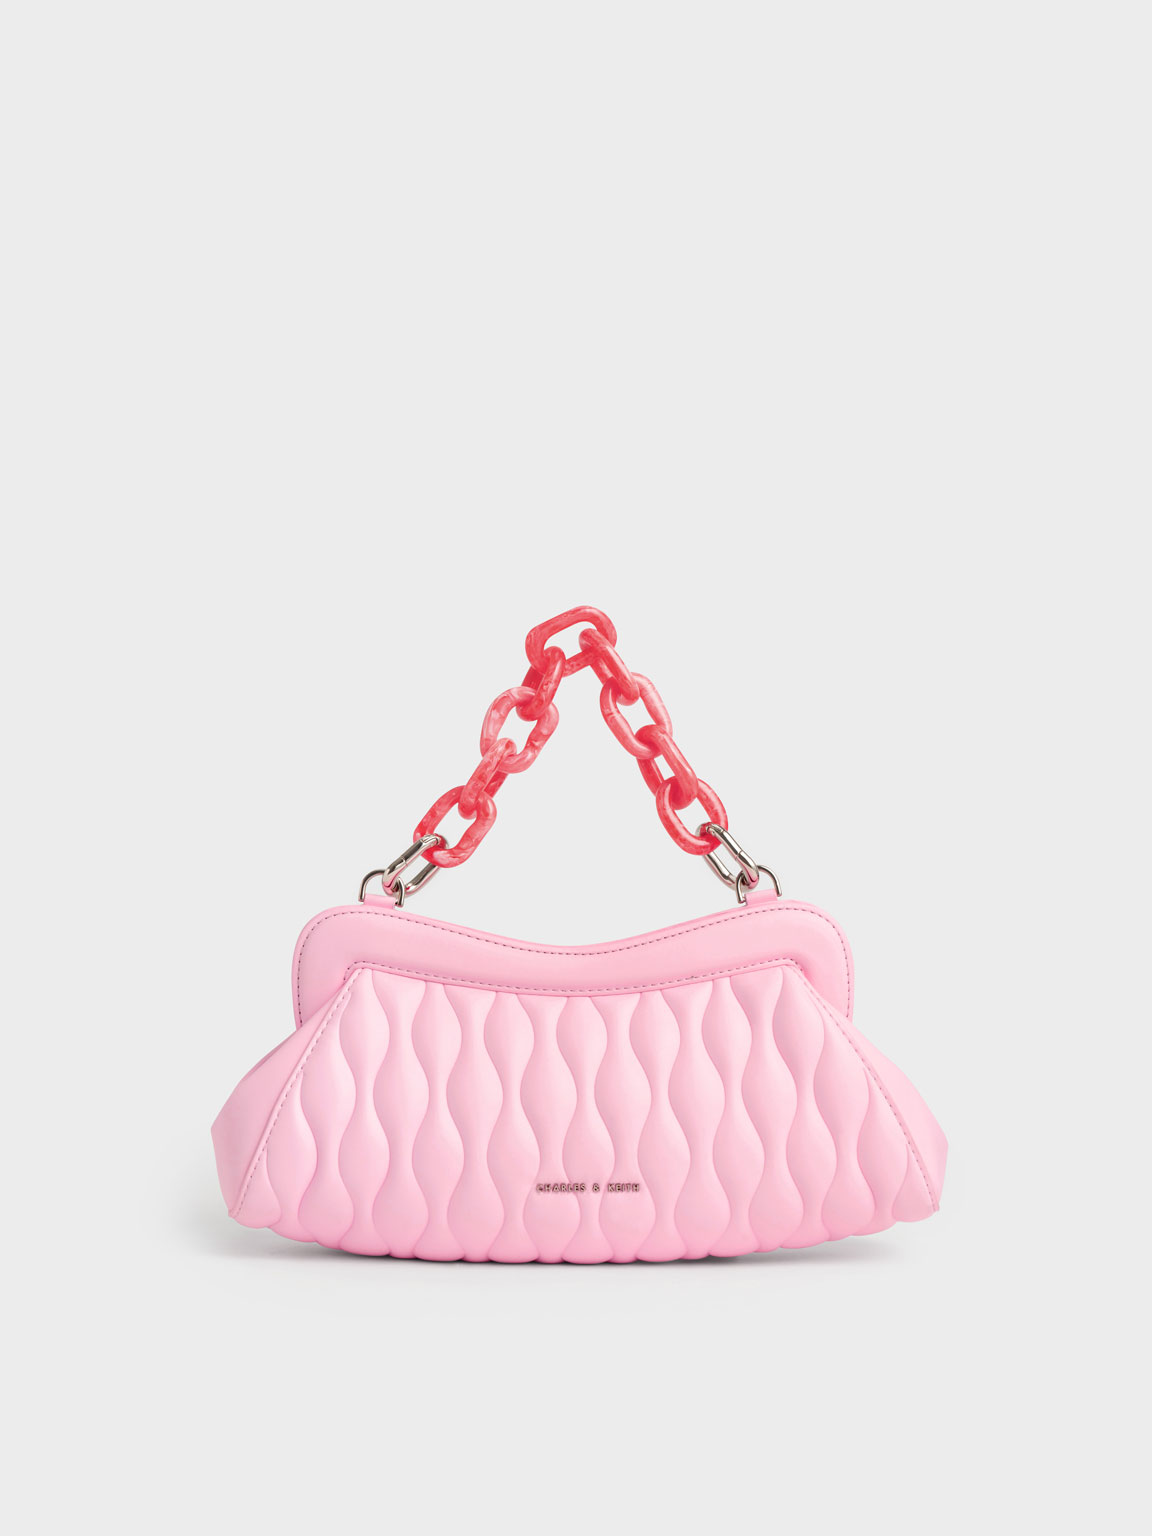 Charles & Keith Iva Acrylic Handle Clutch In Pink